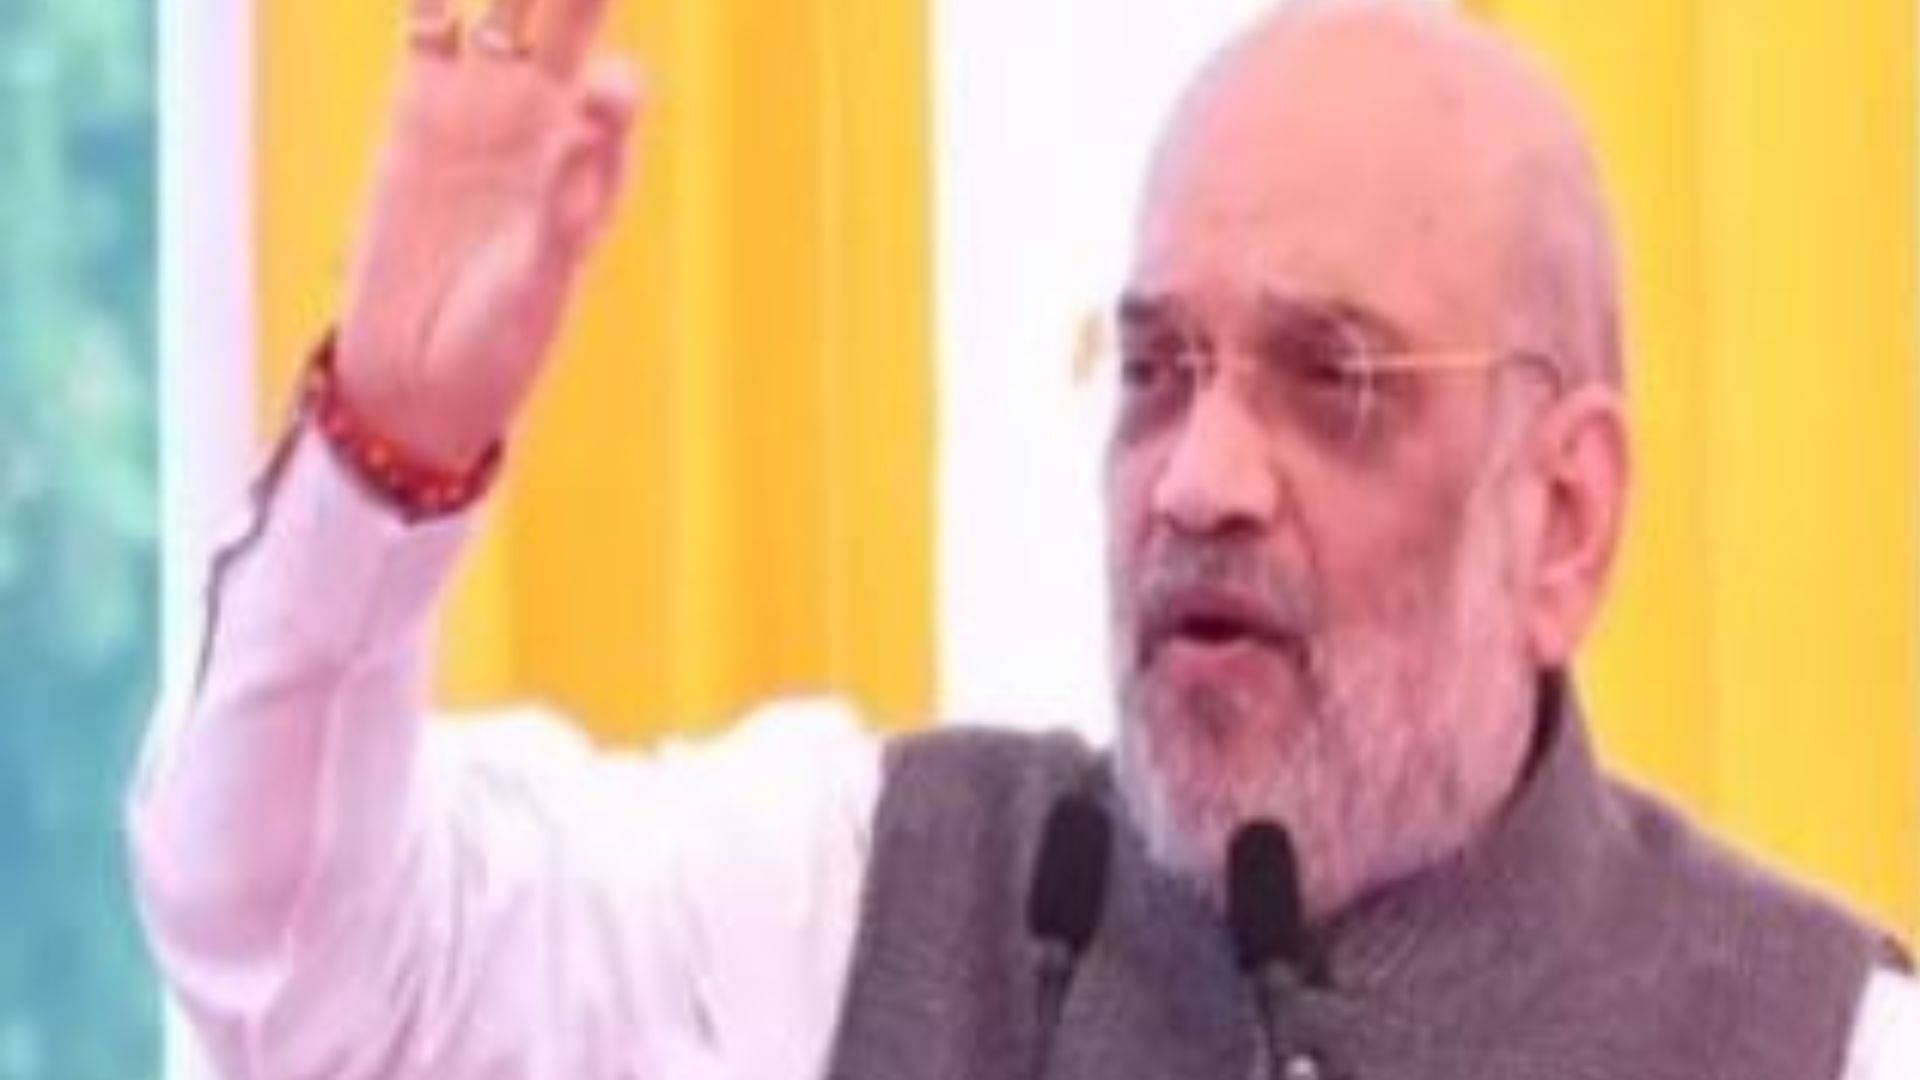 “PM Modi lifted 60 crore people out of poverty”: Amit Shah hails ‘Atmanirbhar Bharat’ campaign